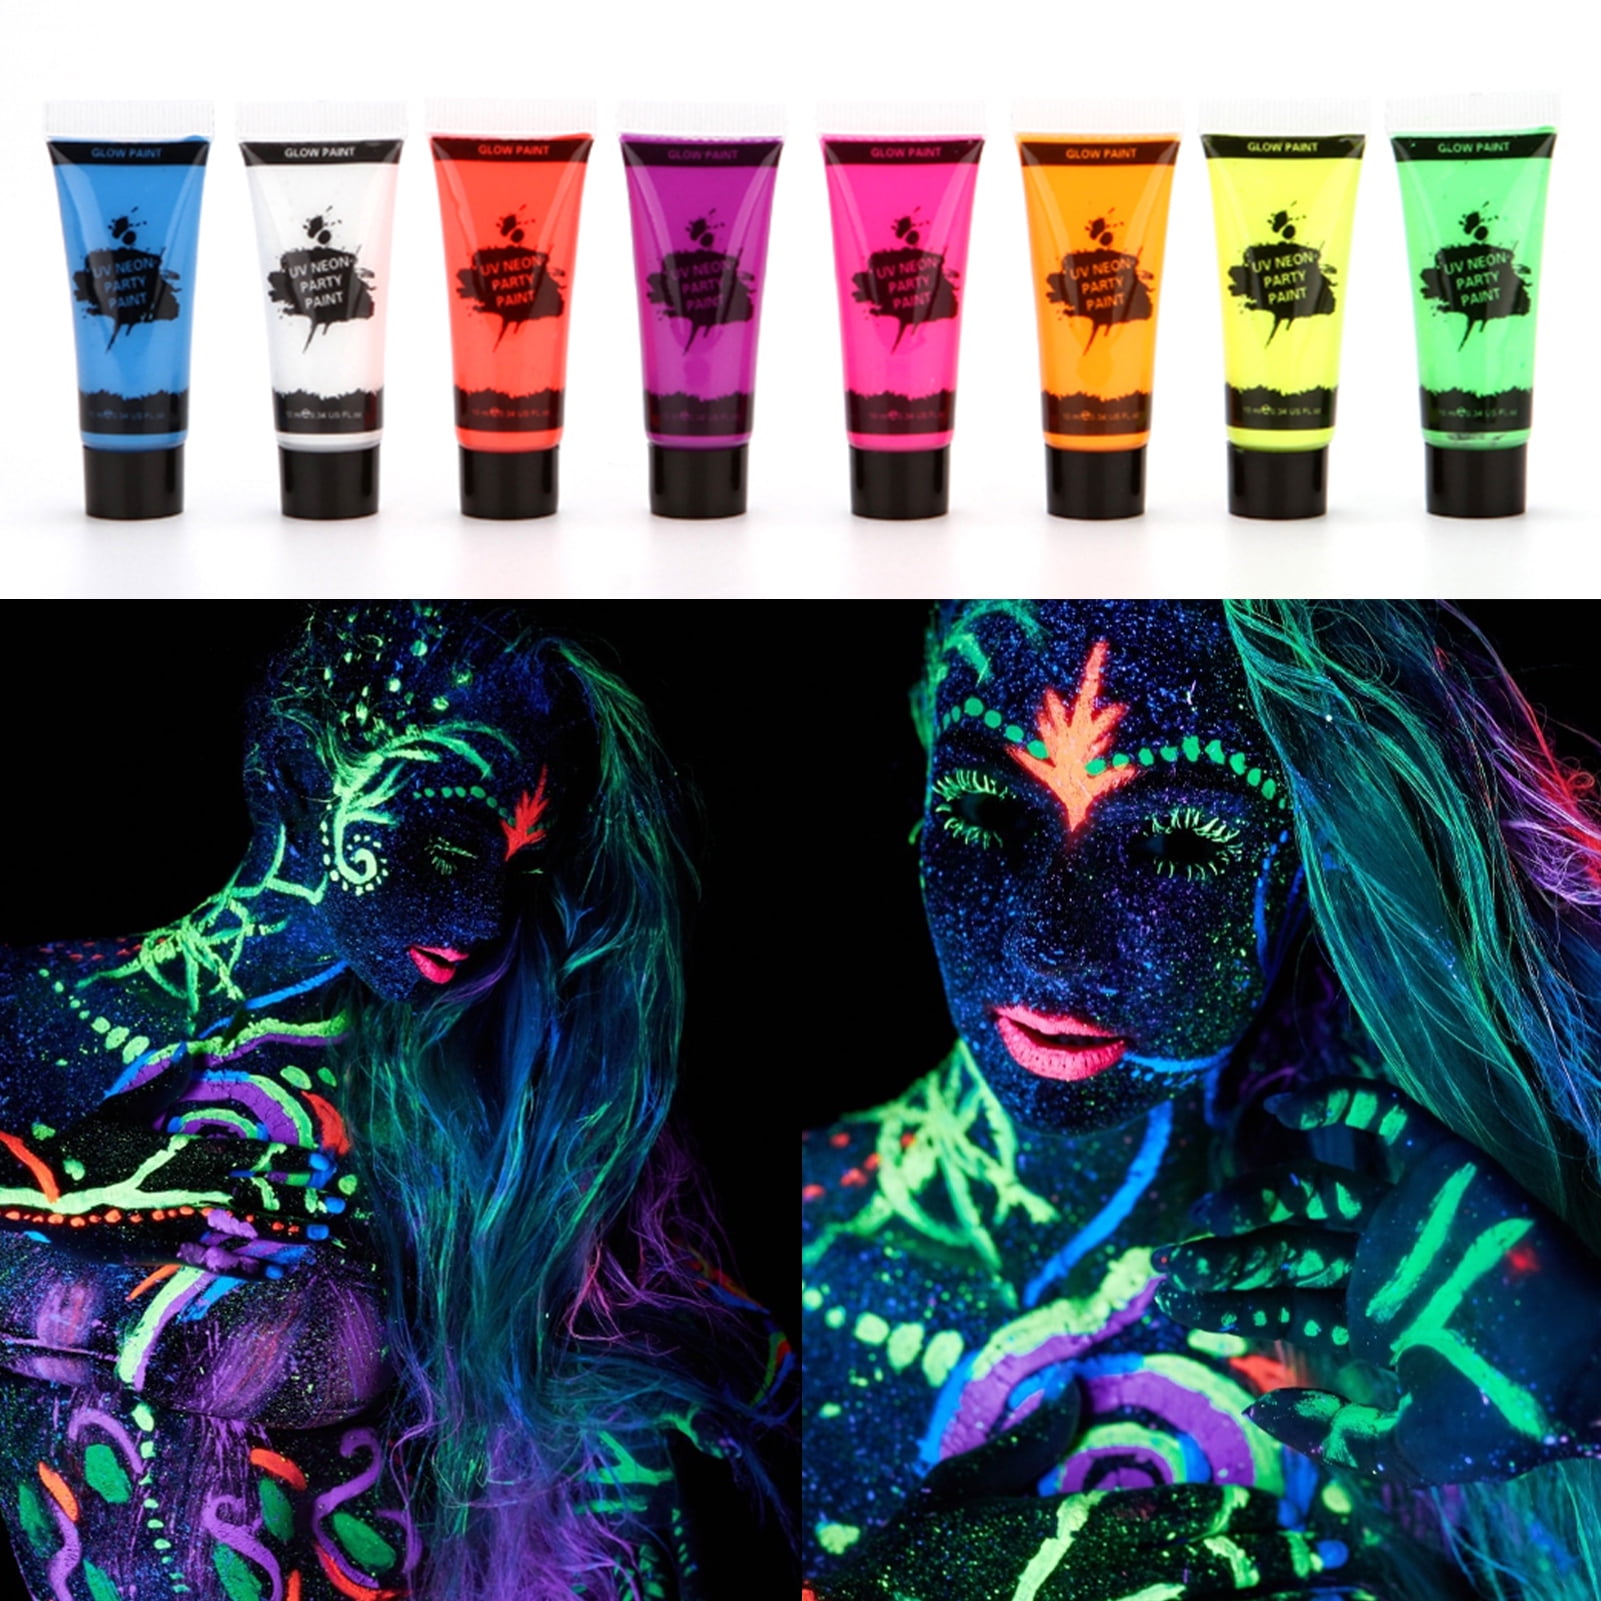 Glow in the Dark Face & Body Paint - Flash Fashion - UV Reactive!